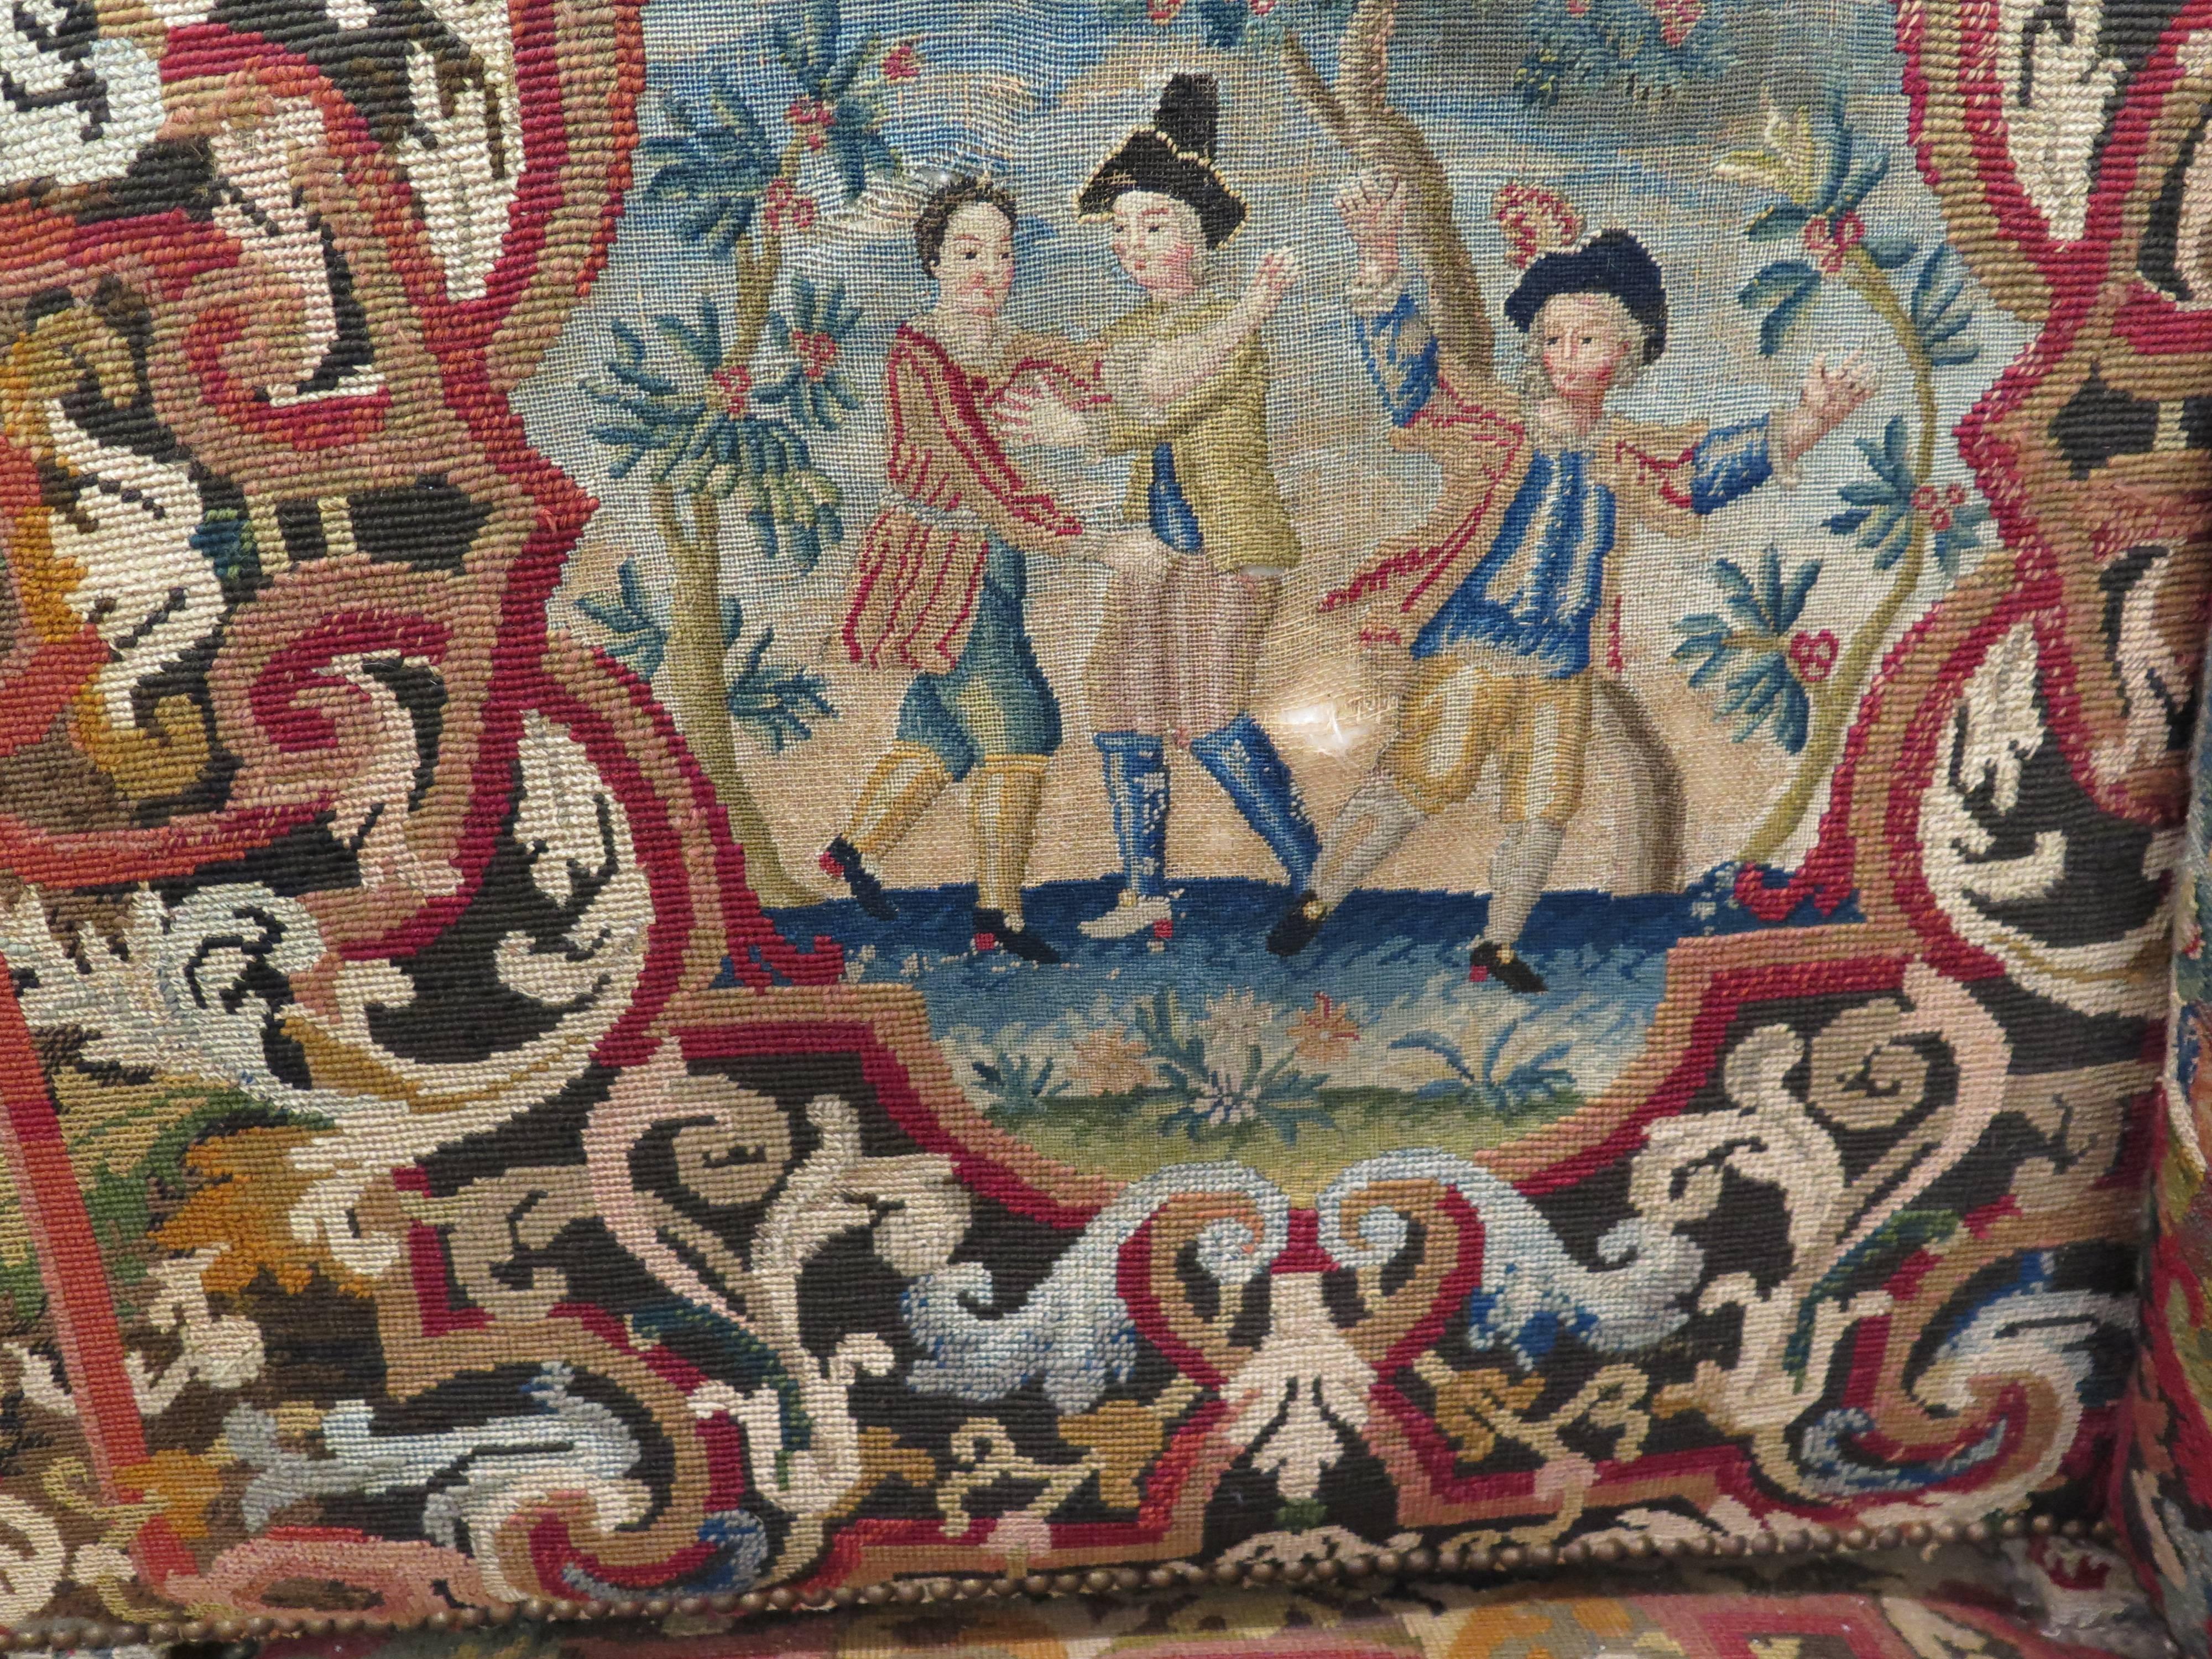 18th century French tapestry sofa with upholstered arms and nail head trim. Covered in original tapestry fabric with vivid colors featuring dancing figures, flowers and birds framed with beautiful pattern and scrolls.
 